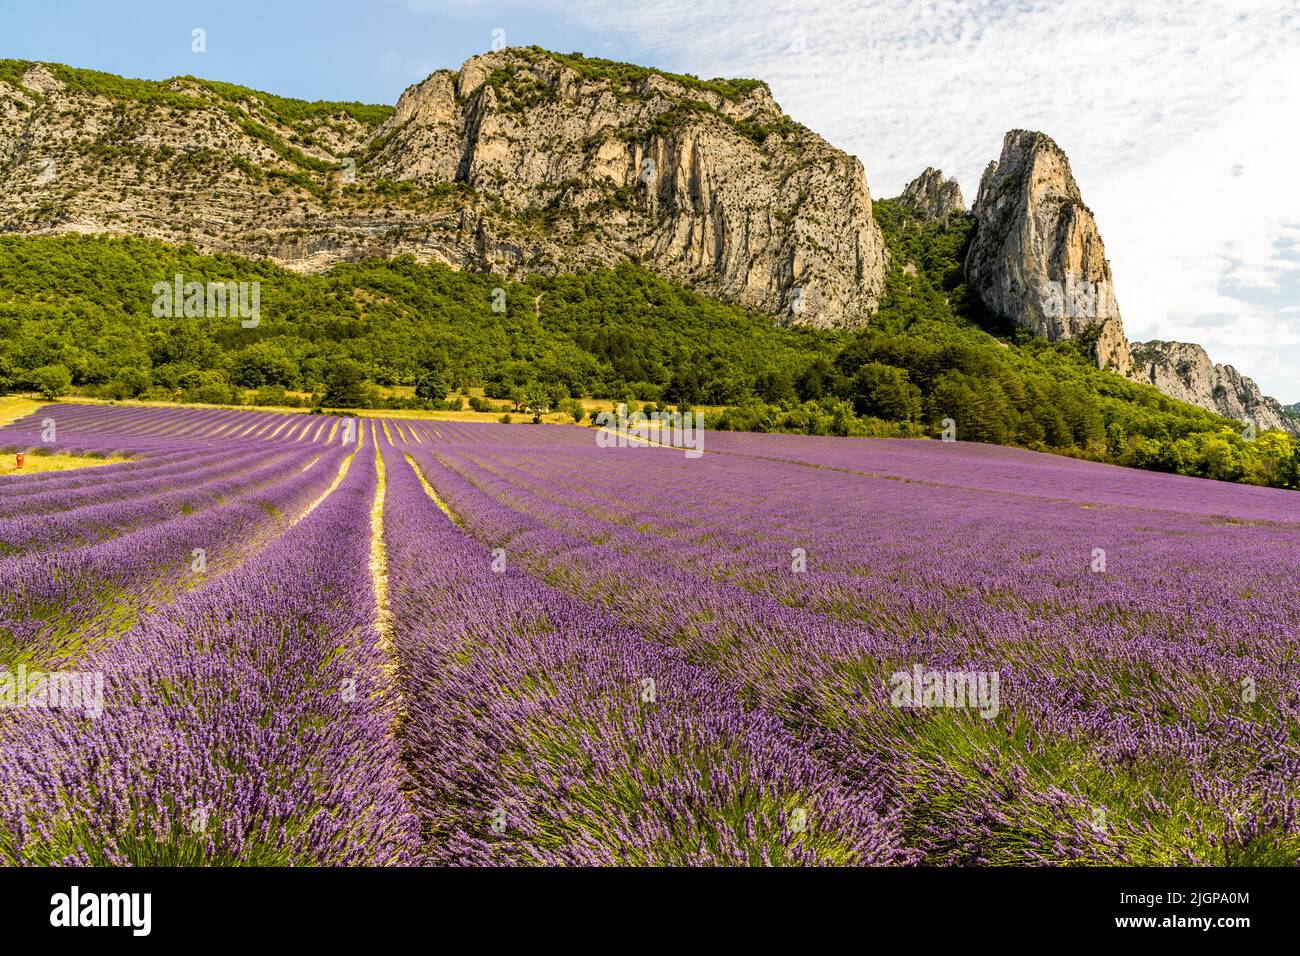 Foothills of the Vercors mountains with lavender field. The Vercors is a mountain range bounded by deep valleys in the far west of the French Alps. In the Vercor is the largest nature reserve in France with 170 square kilometers Stock Photo